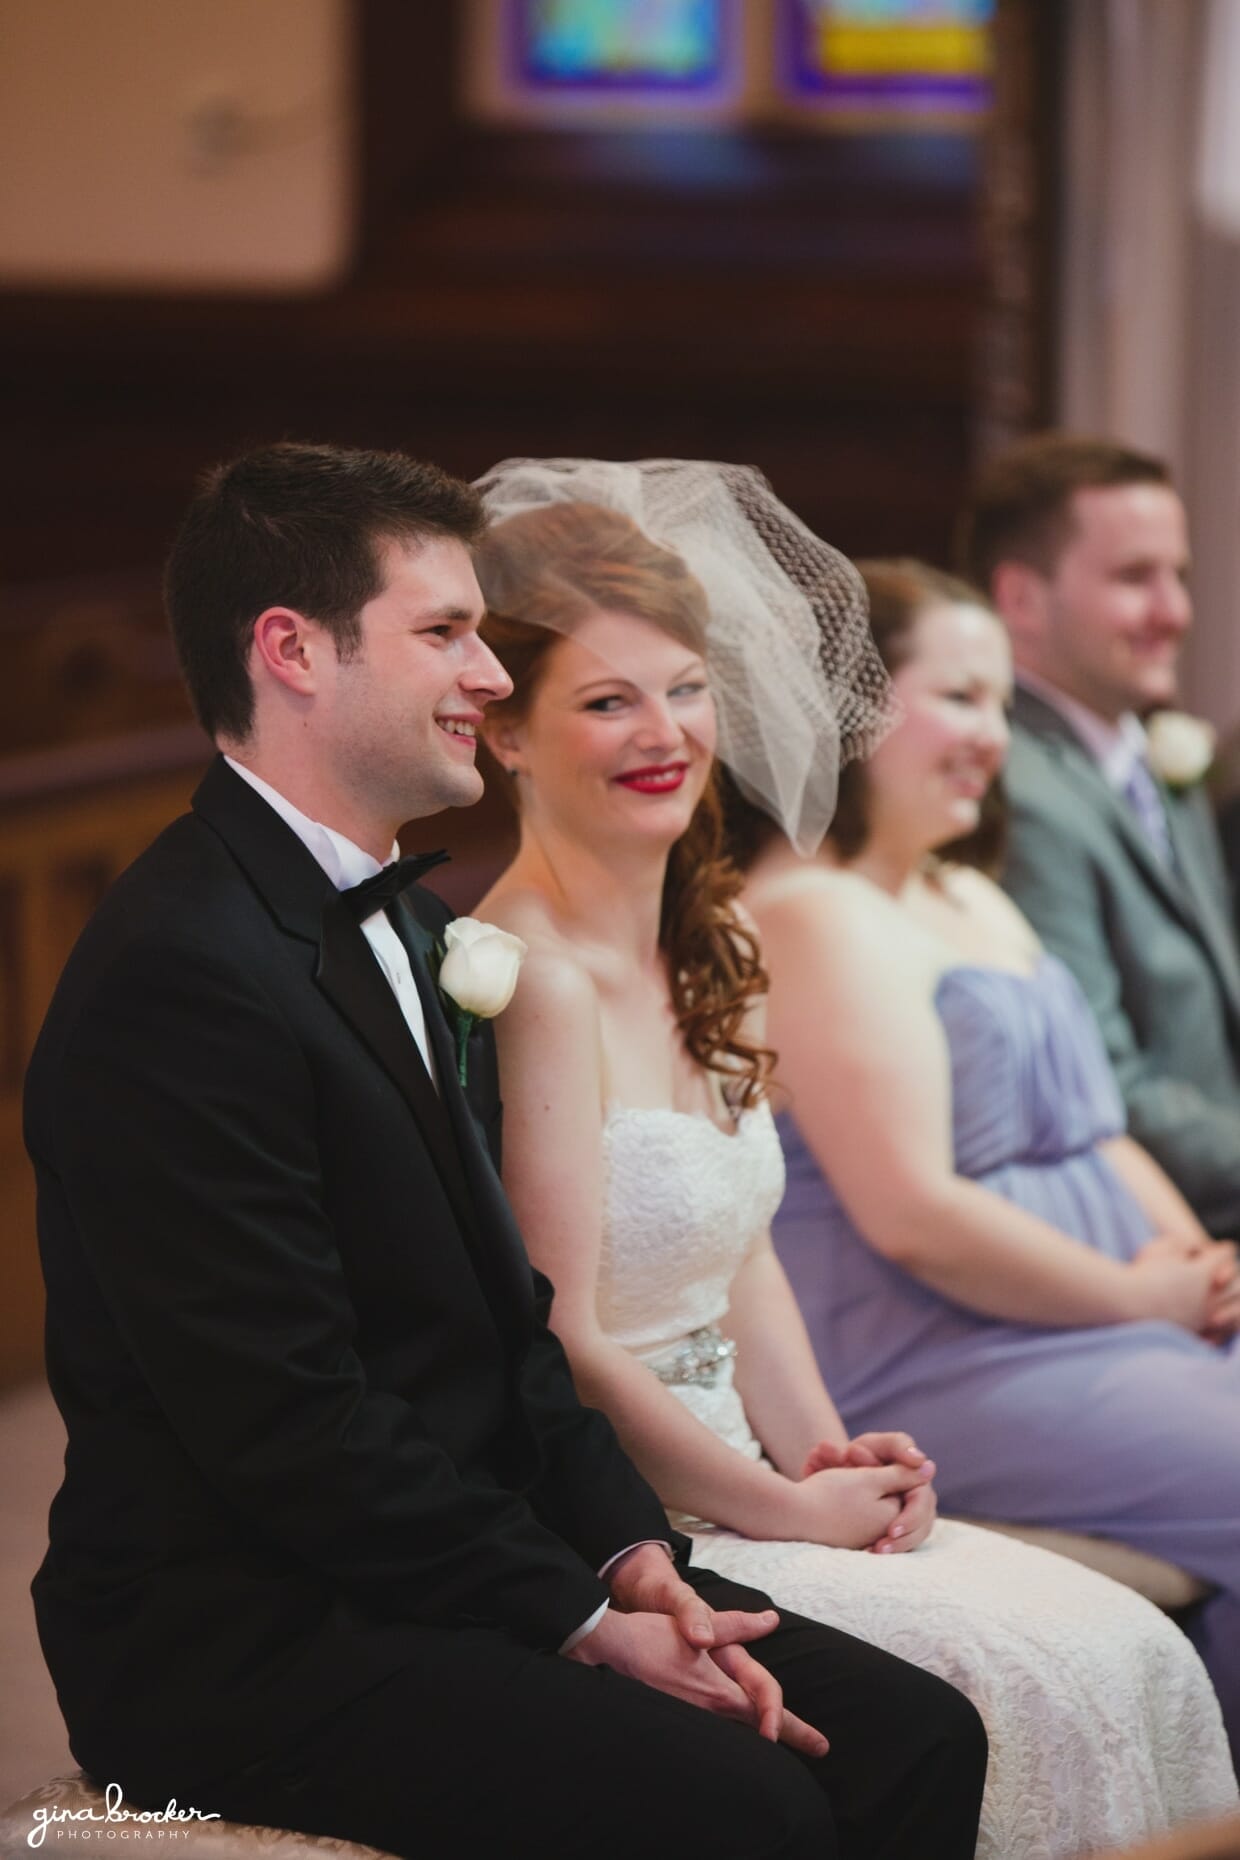 A bride smiles at her groom during their wedding ceremony at the Sacred Heart of Jesus Church in Cambridge, Massachusetts